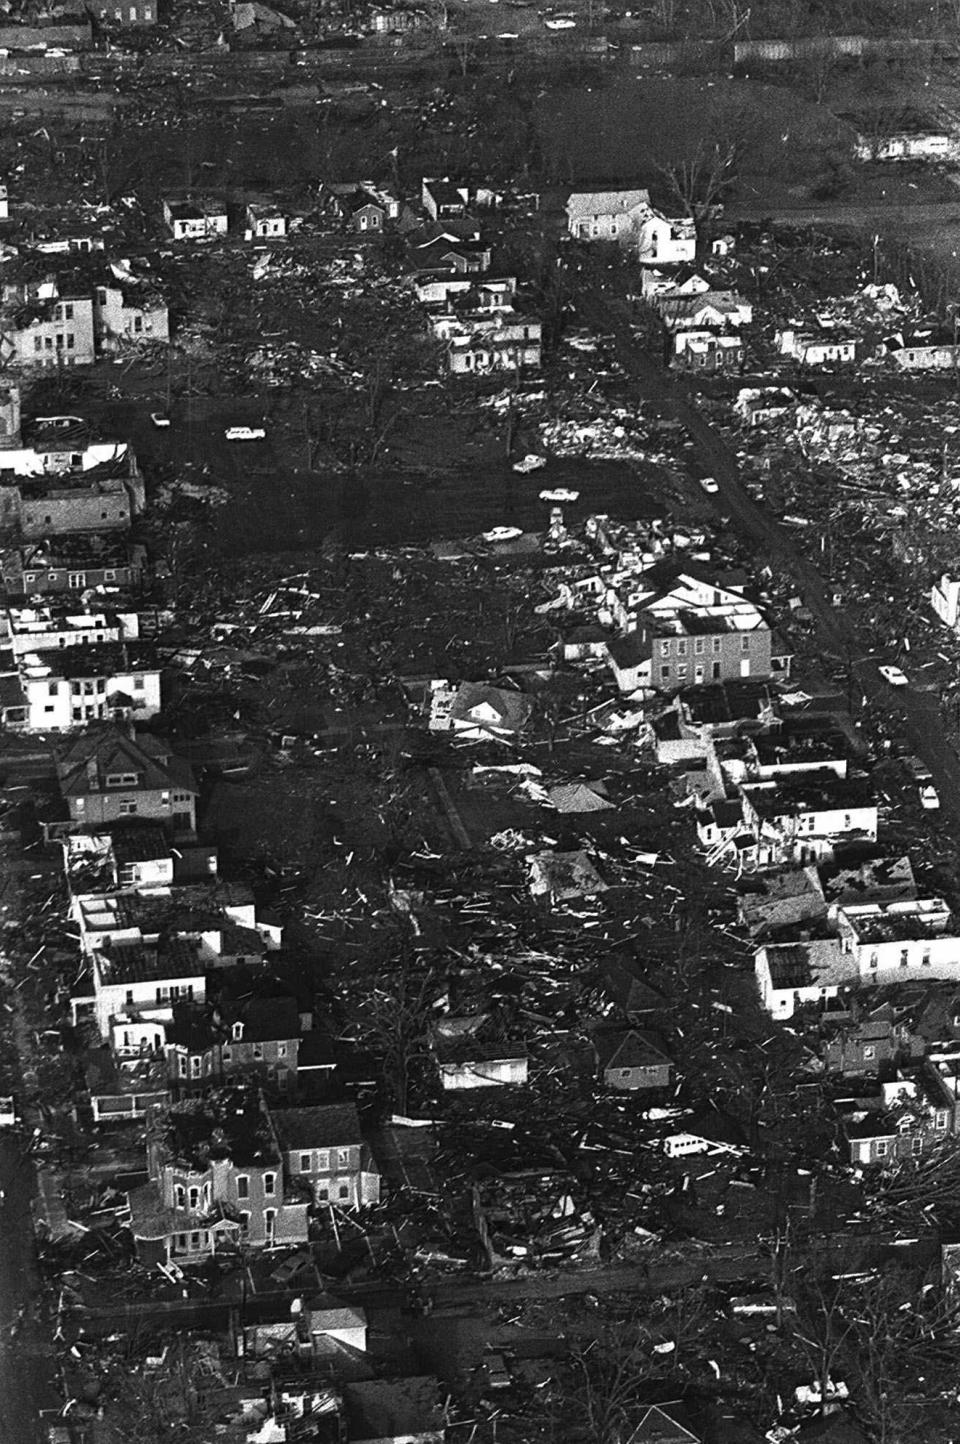 FILE - An aerial view of Xenia, Ohio, which was hit by tornados late April 4, 1974. The deadly tornado killed 32 people, injured hundreds and leveled half the city of 25,000. Nearby Wilberforce was also hit hard. As the Watergate scandal unfolded in Washington, President Richard Nixon made an unannounced visit to Xenia to tour the damage. Xenia's was the deadliest and most powerful tornado of the 1974 Super Outbreak. (AP Photo/ Barry Thumma, file)